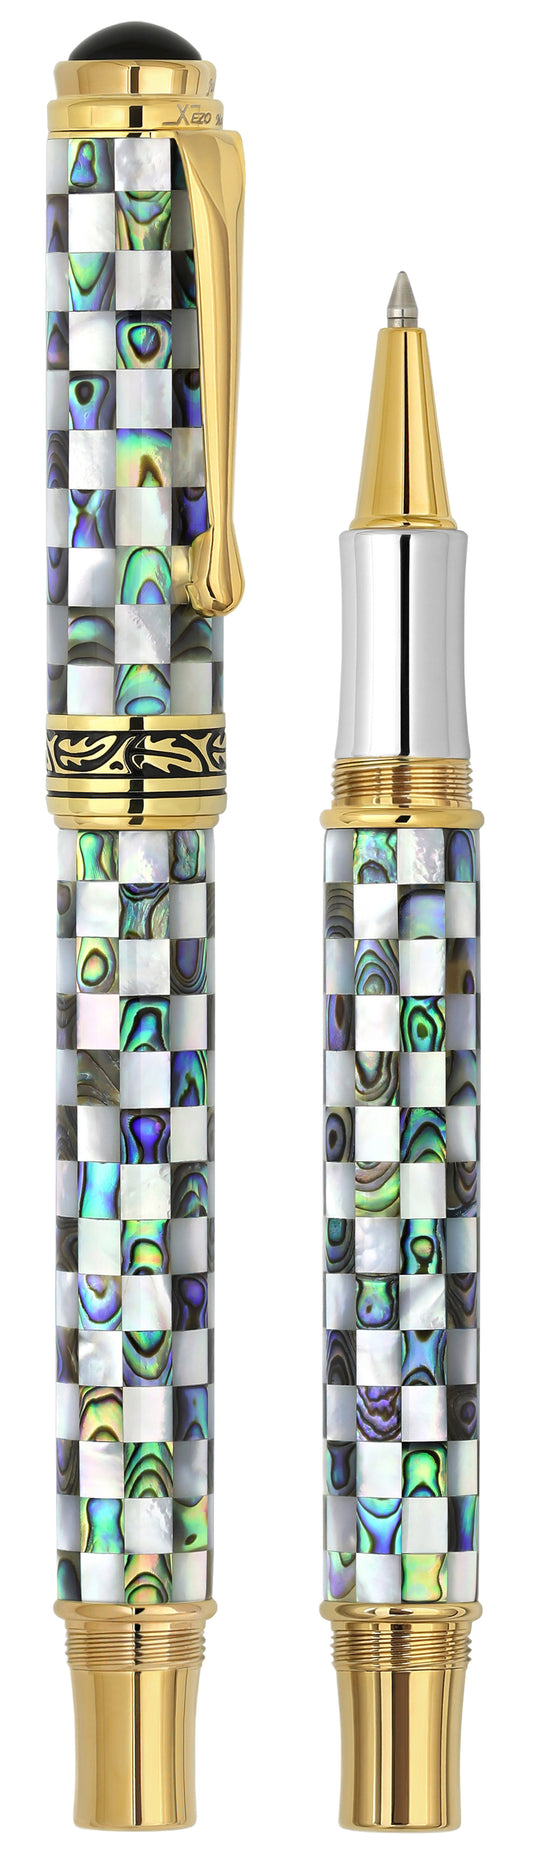 Xezo - Vertical view of two Maestro Jubilee Gold R rollerball pens; the one on the left is capped, and the one on the right is uncapped